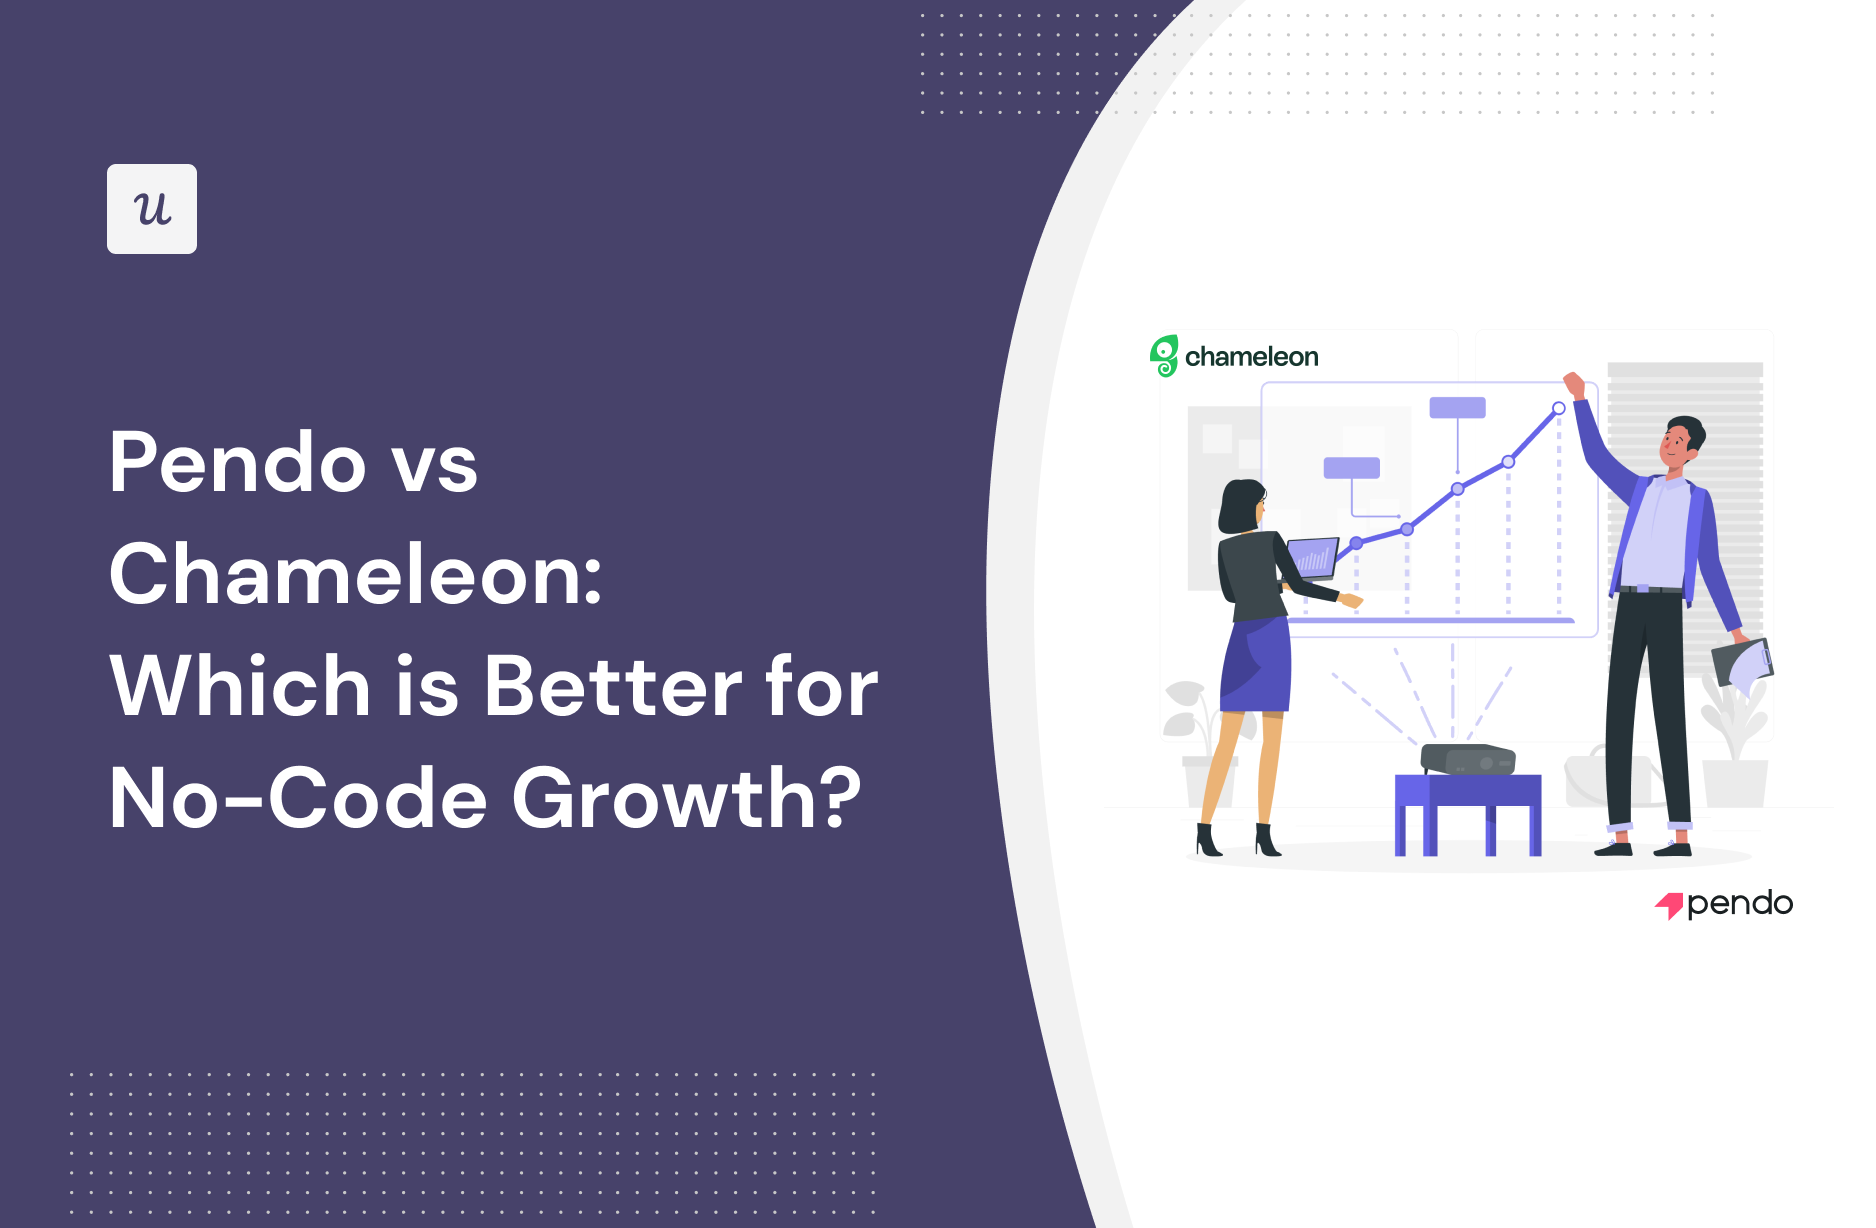 Pendo vs Chameleon: Which is Better for No-Code Growth?